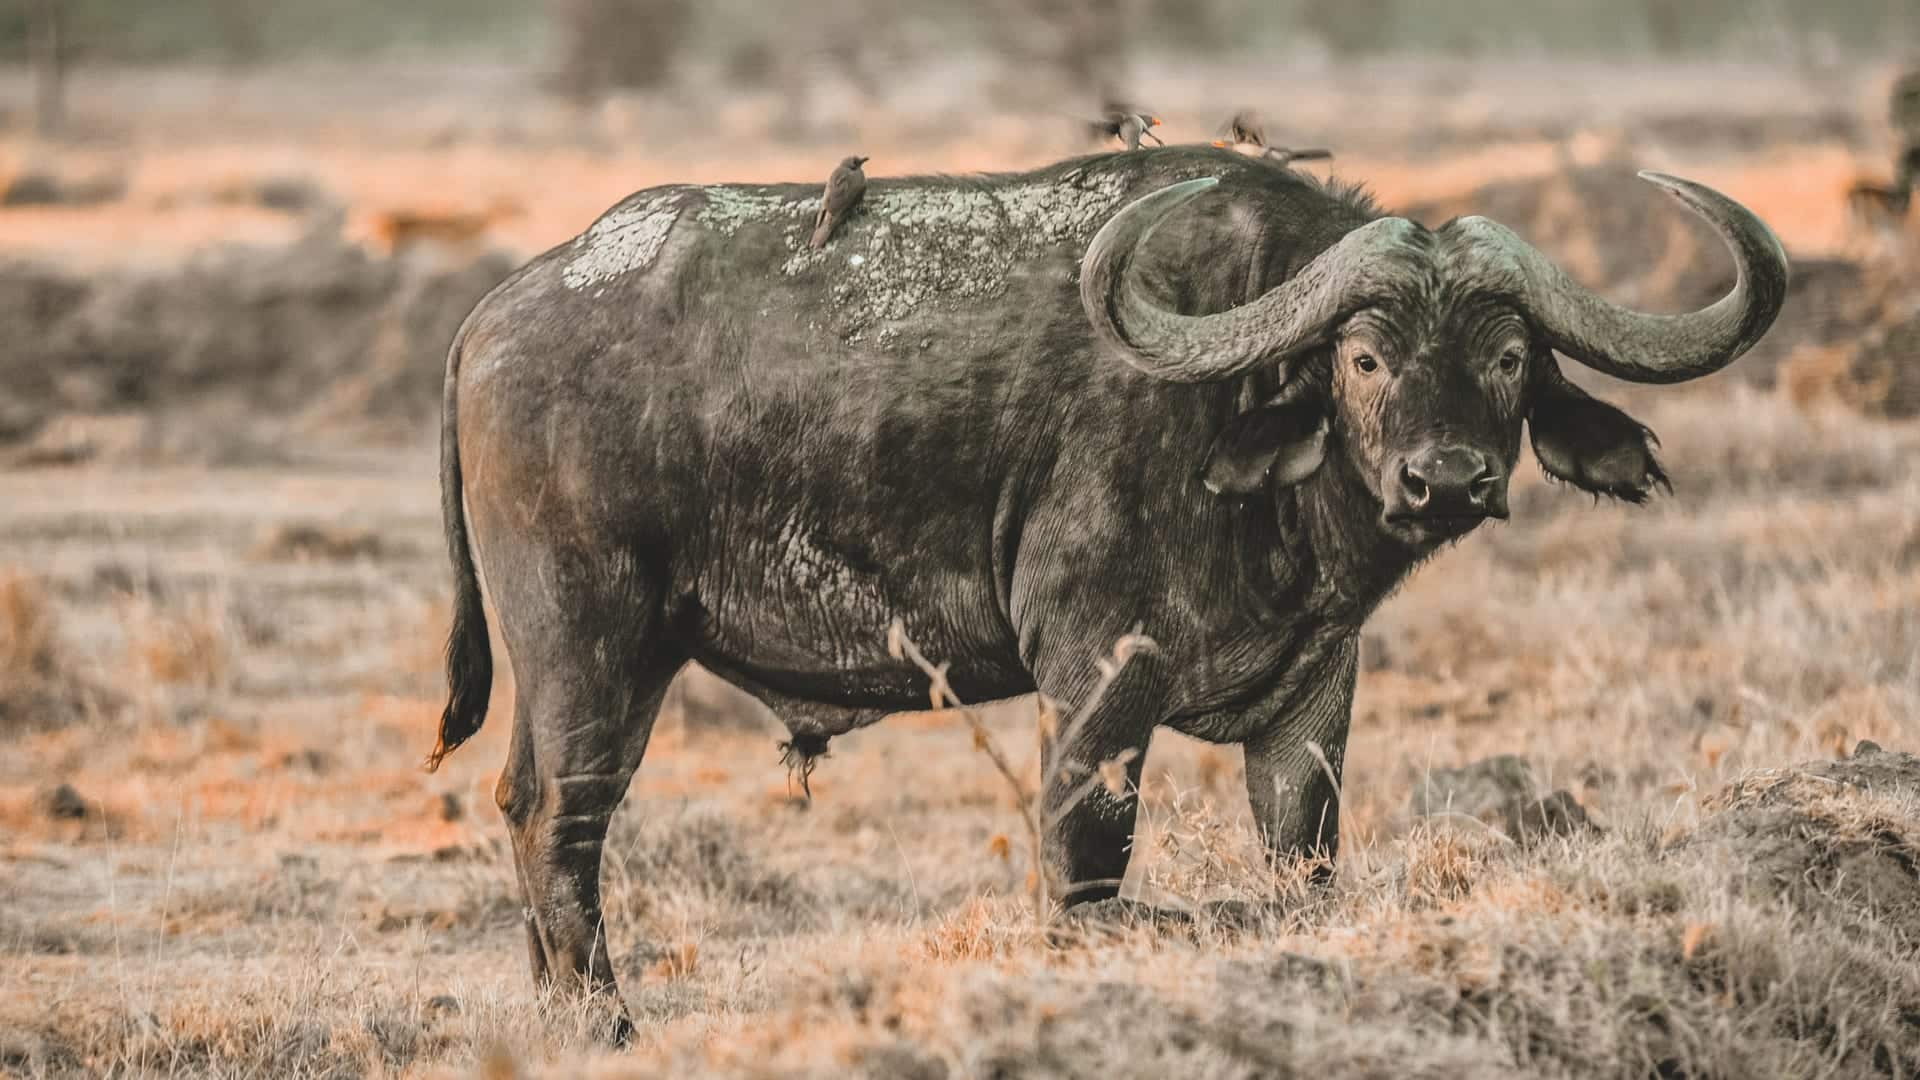 Water Buffalo with oxpeckers